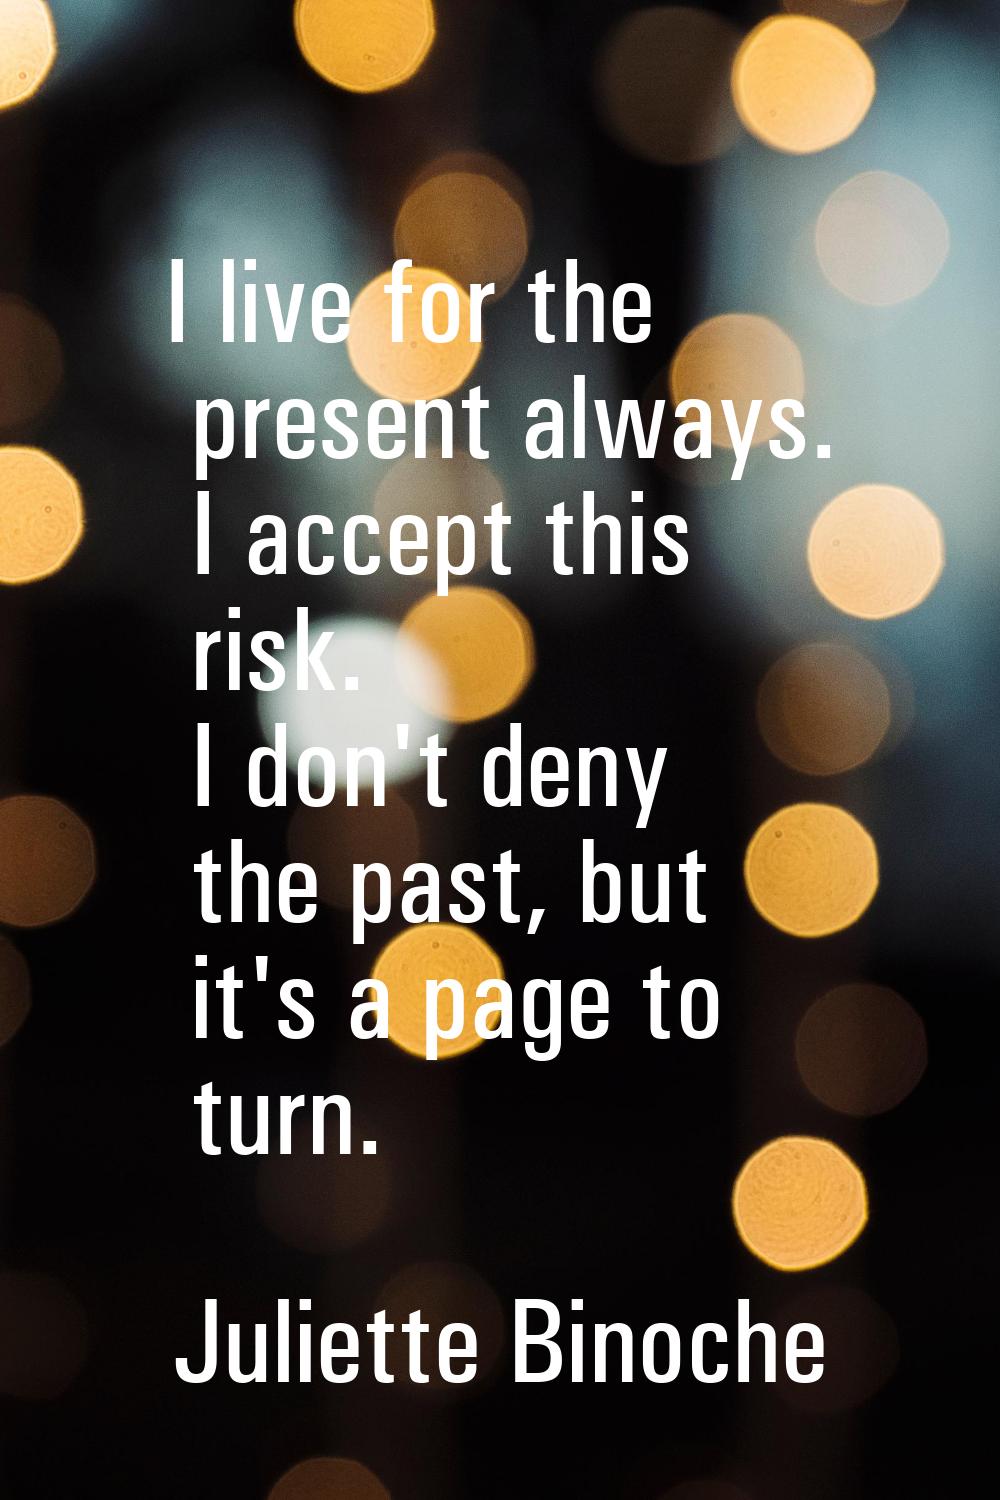 I live for the present always. I accept this risk. I don't deny the past, but it's a page to turn.